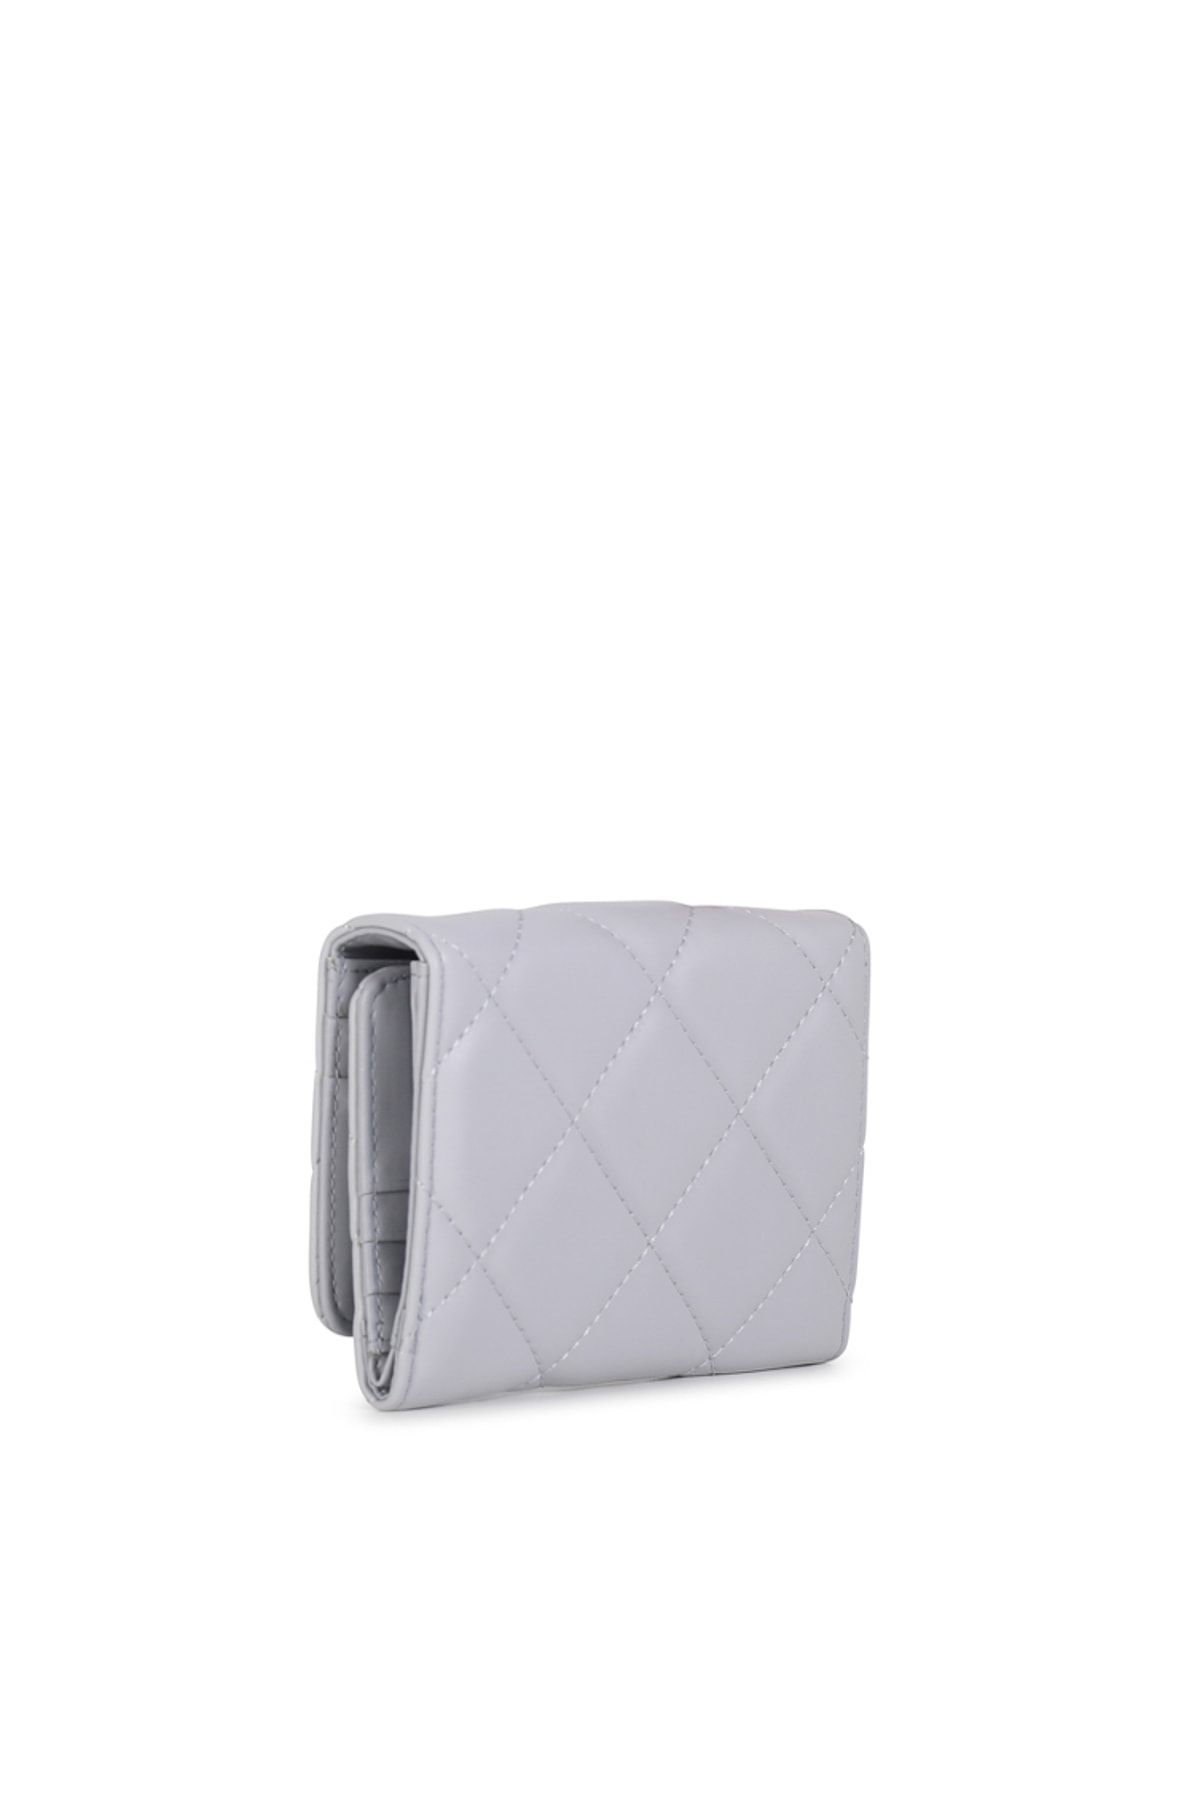 Shop CHANEL Classic Small Flap Wallet (AP0230) by HANANOMA'SSHOP